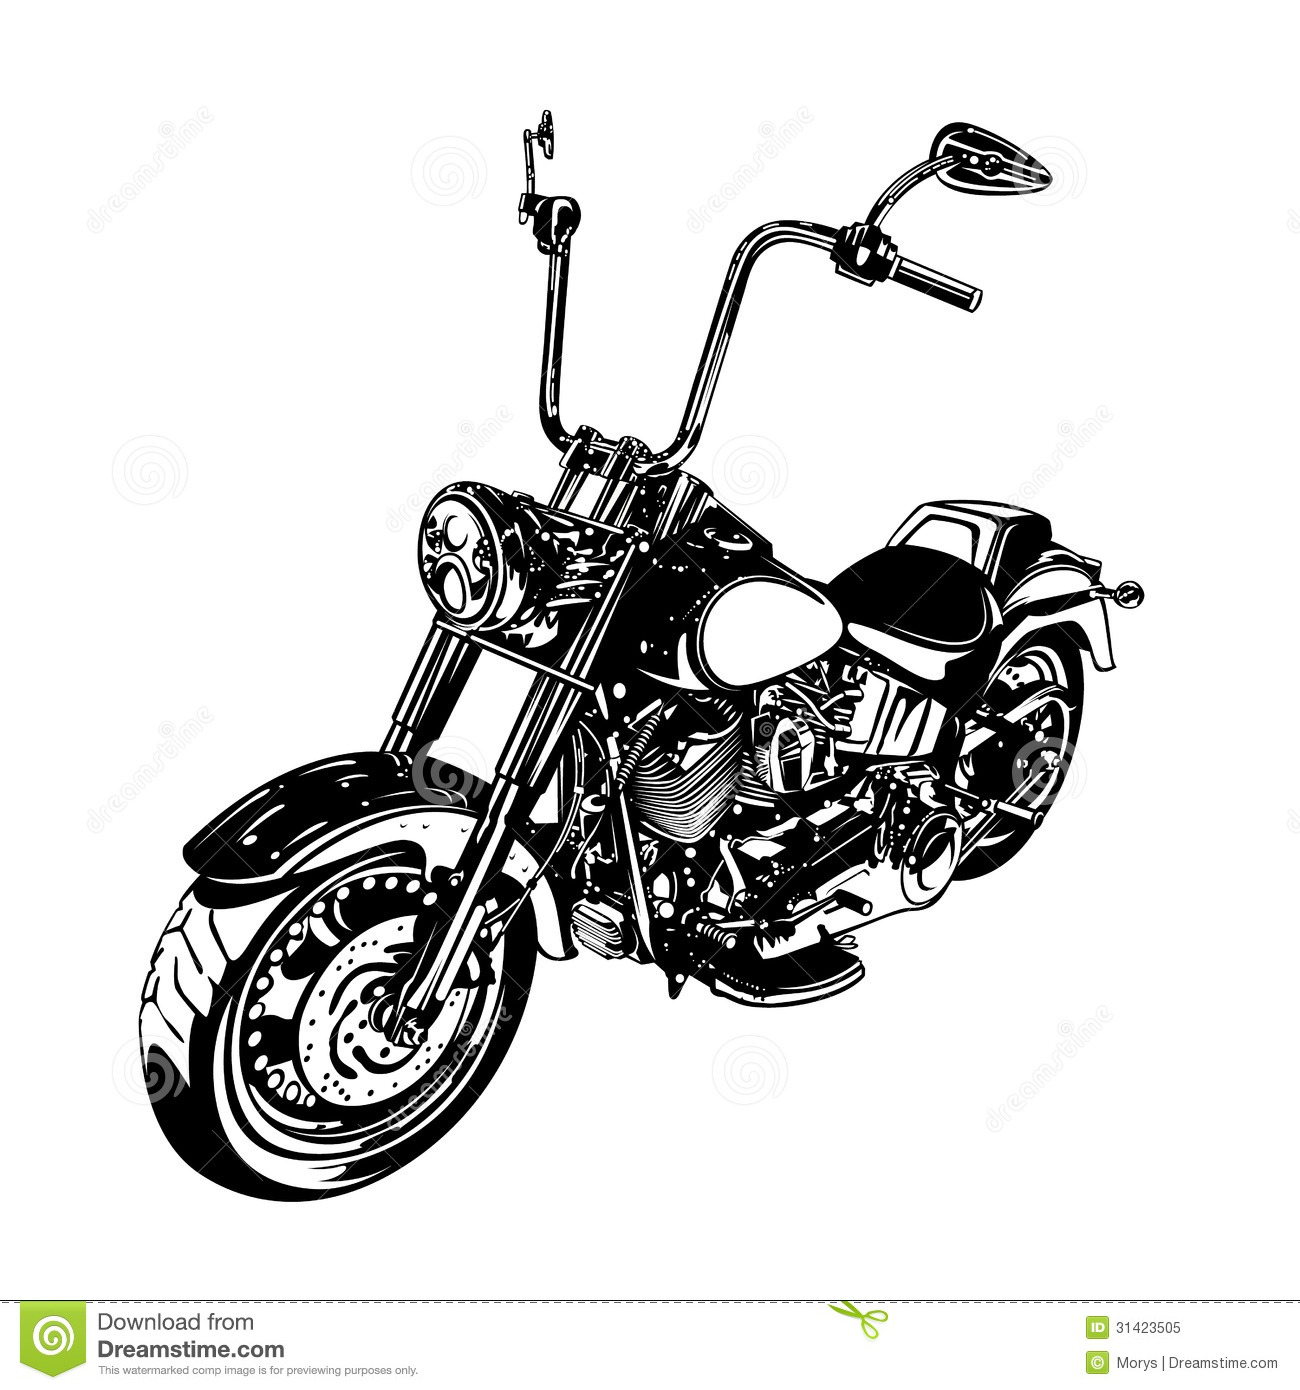 free vector motorcycle clipart - photo #14